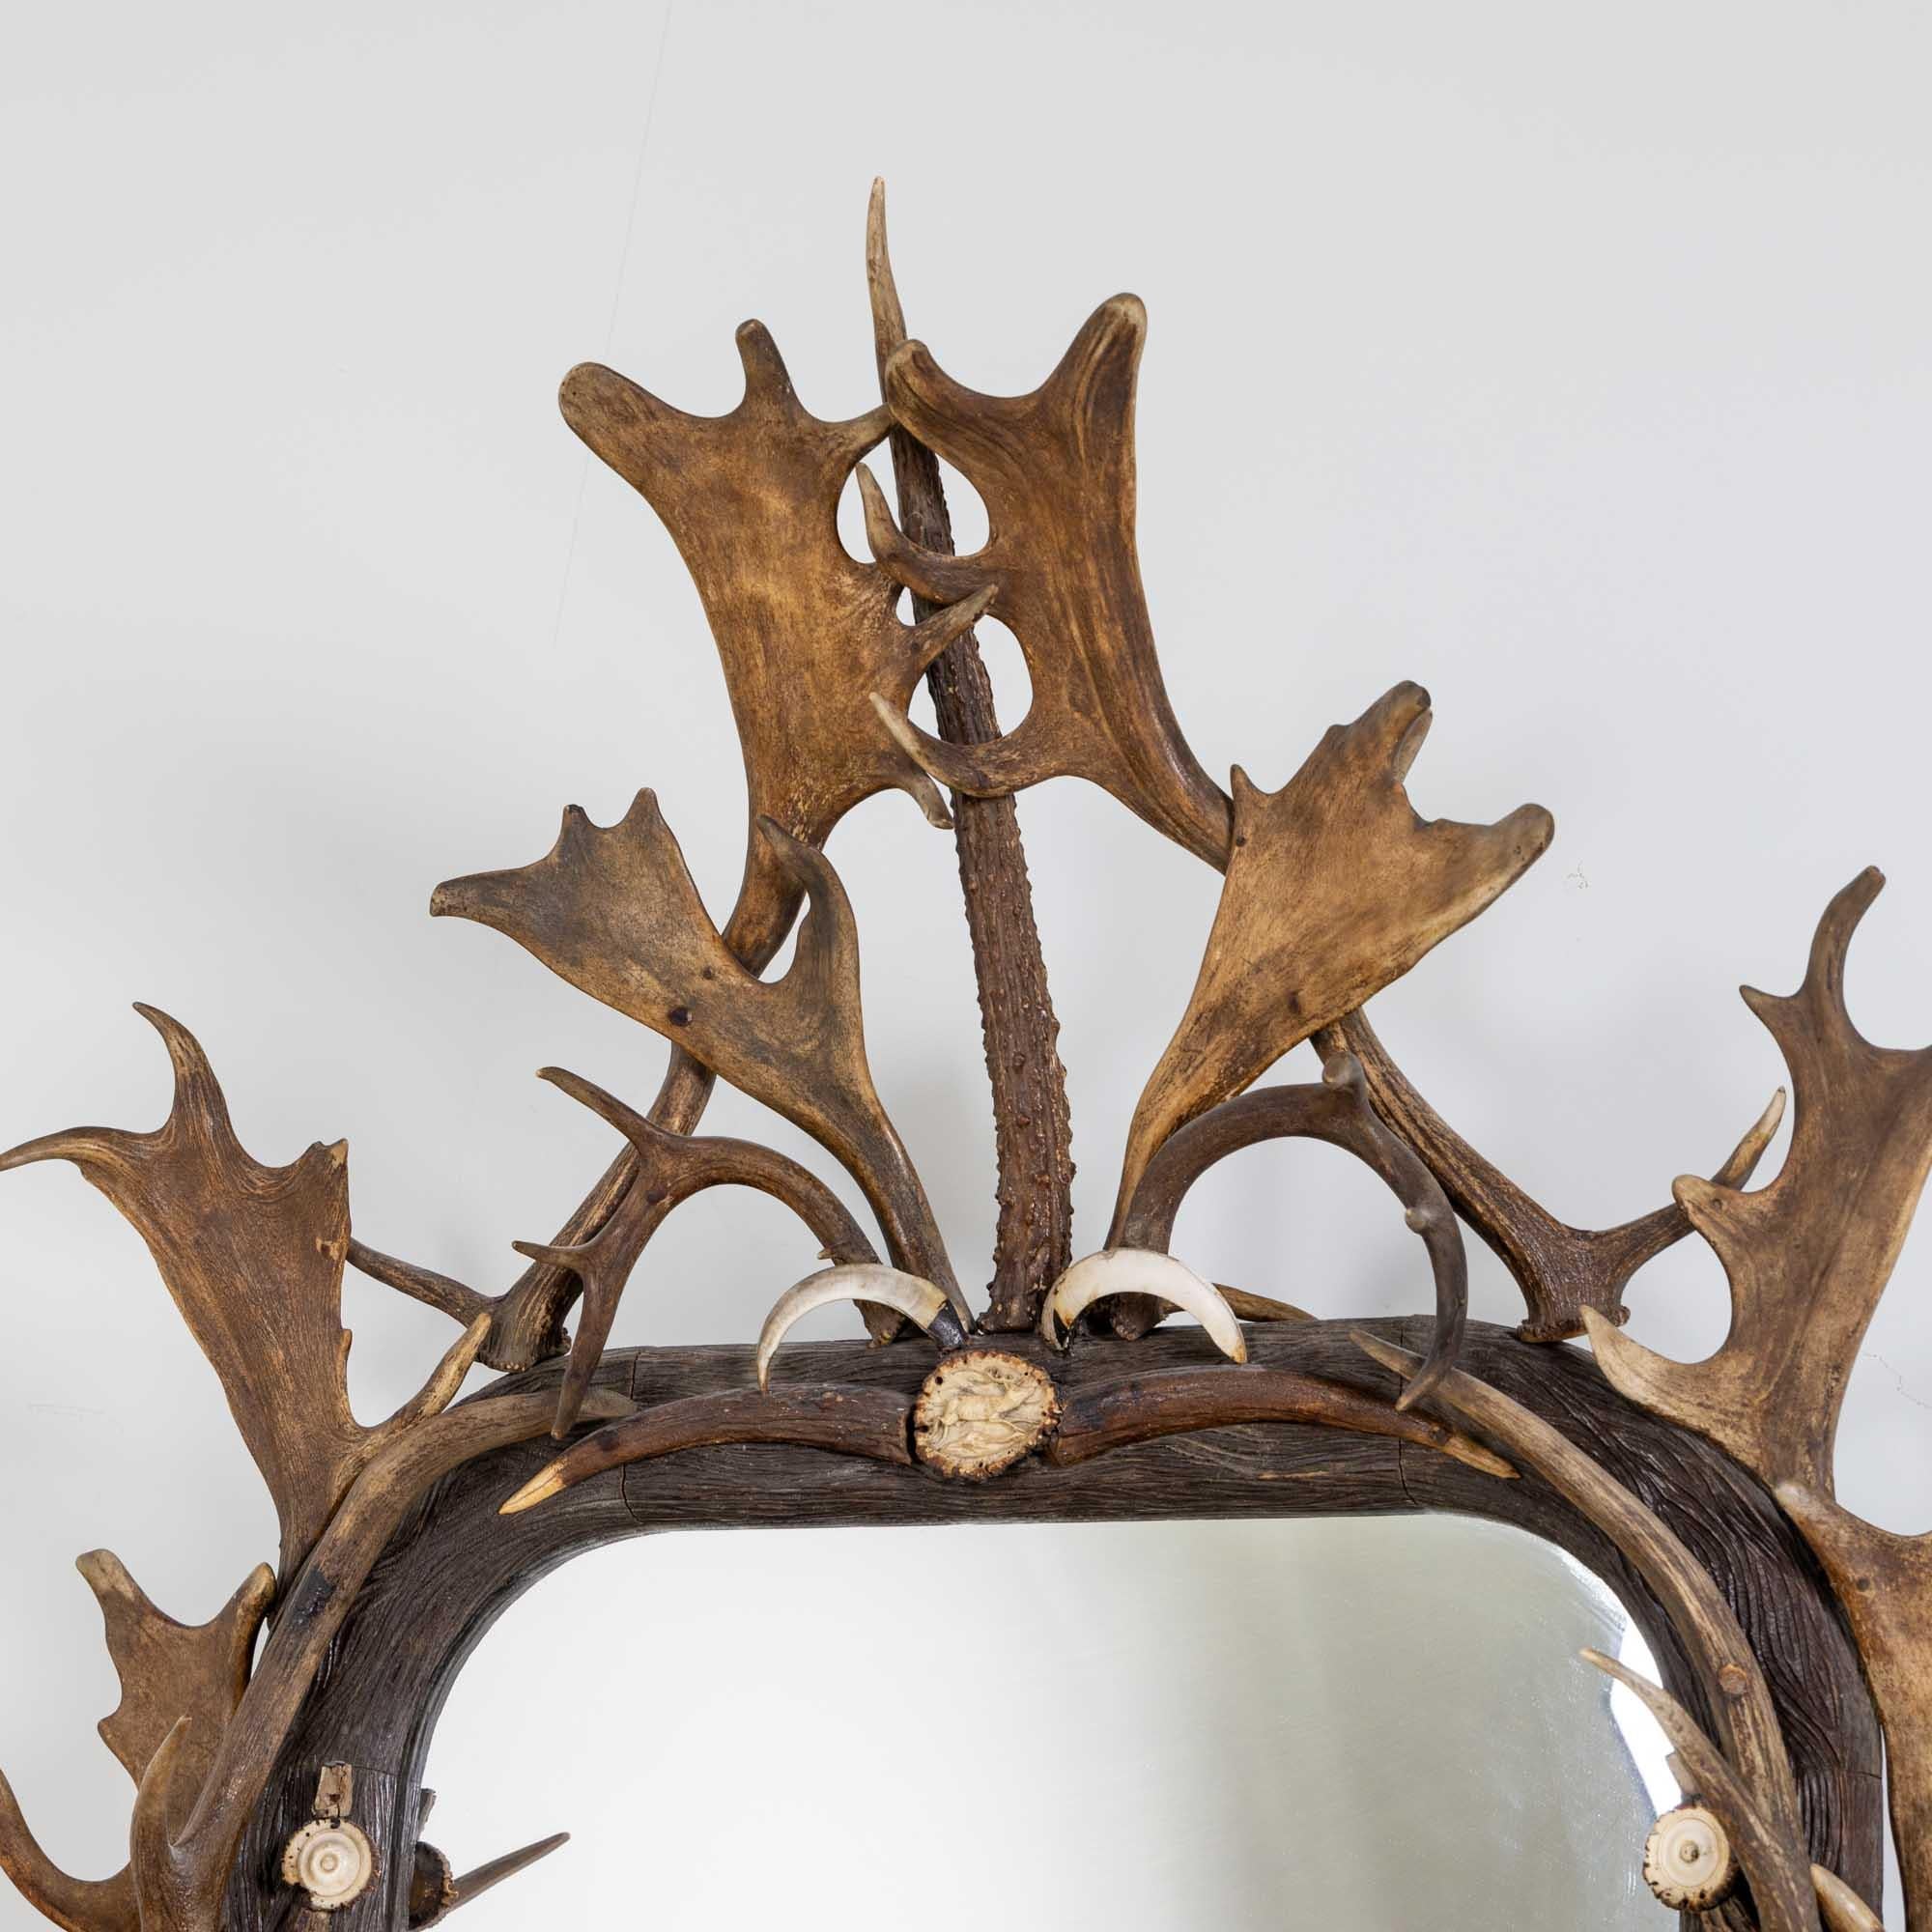 Large rectangular wall mirror with a large frame with rounded corners and symmetrical decoration of deer antlers and tusks. The ends of the antlers are partly decorated with small carvings in the shape of deer. Smaller decorative parts missing.